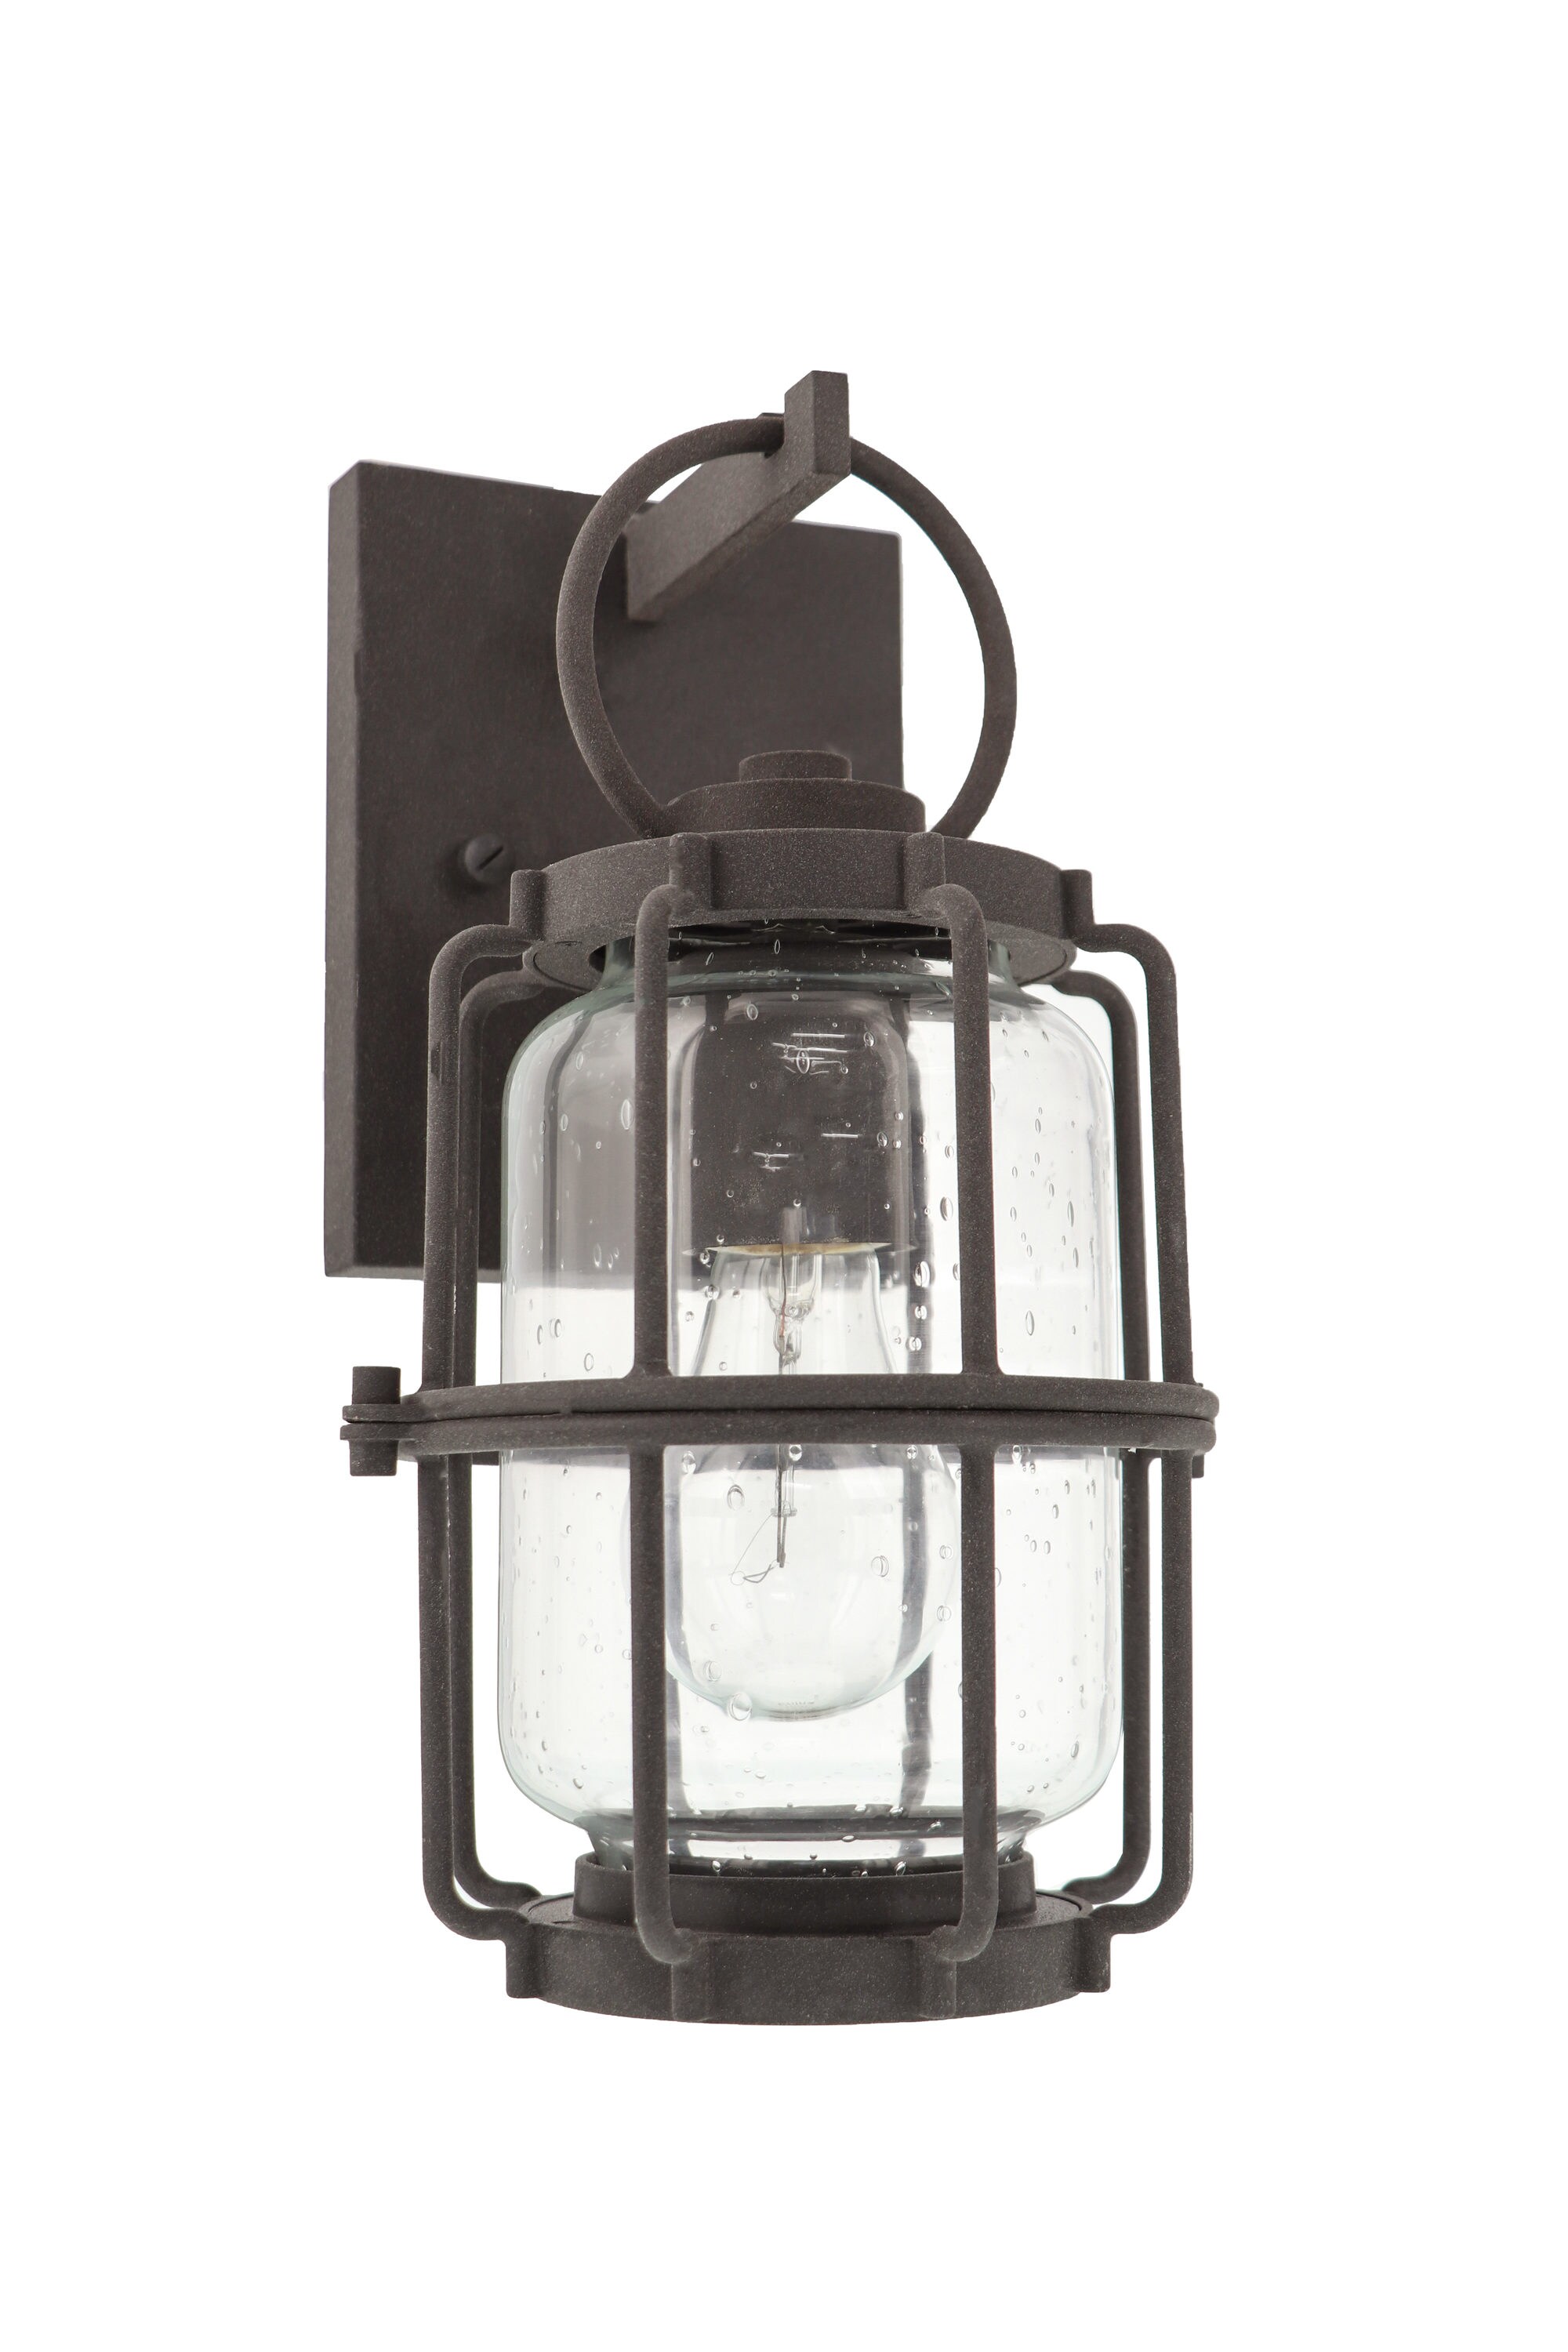 Shop Kichler Montview Weathered Zinc Outdoor Lighting Collection